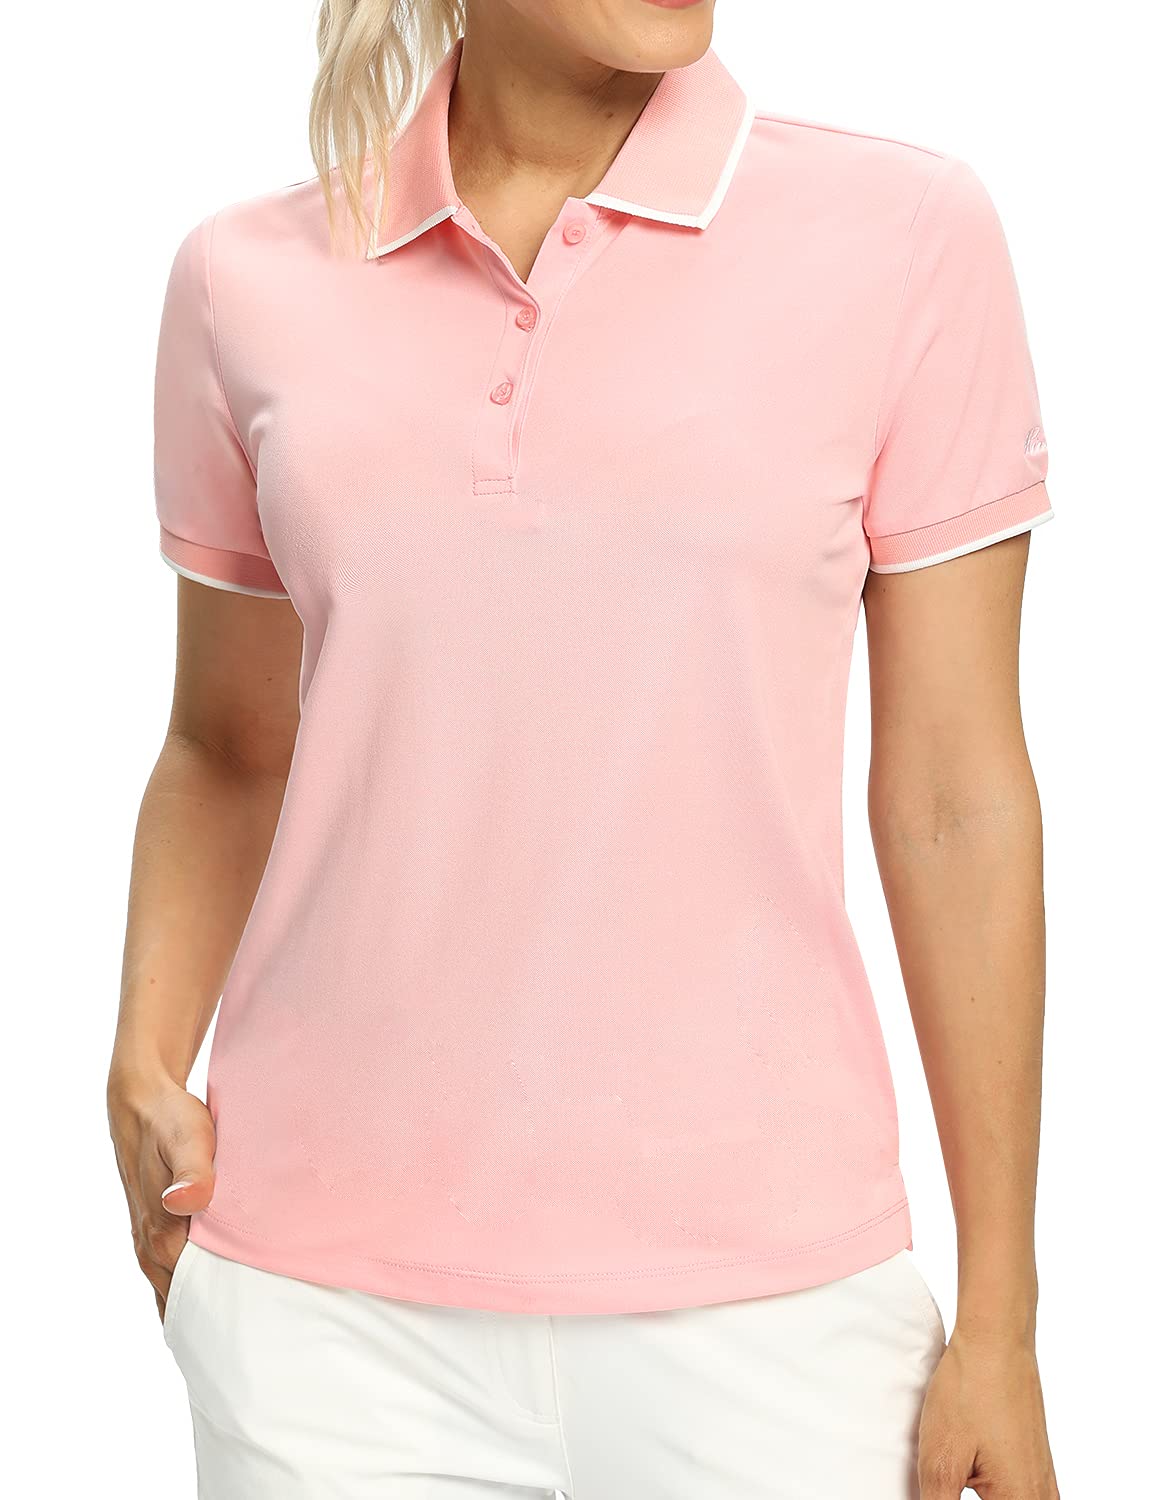 Golf Women Quick-Dry Contrast Daily Lightweight Tennis Collared Women UPF Color Color X-Large Hiverlay Pink-contrast Polo for Shirts Tops Shirts Edge 50+ Work Shirts Edge